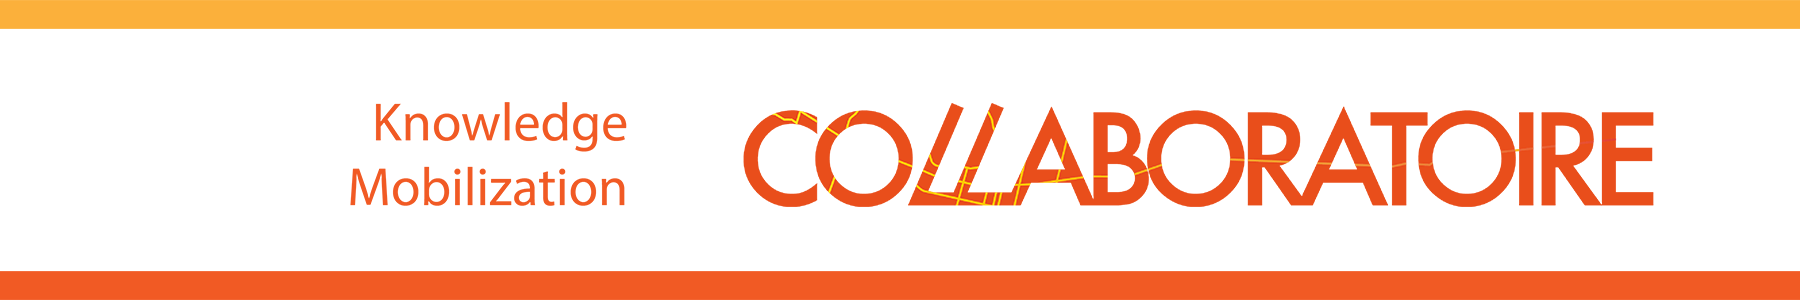 New-CoLLaboratoire-Banner.png